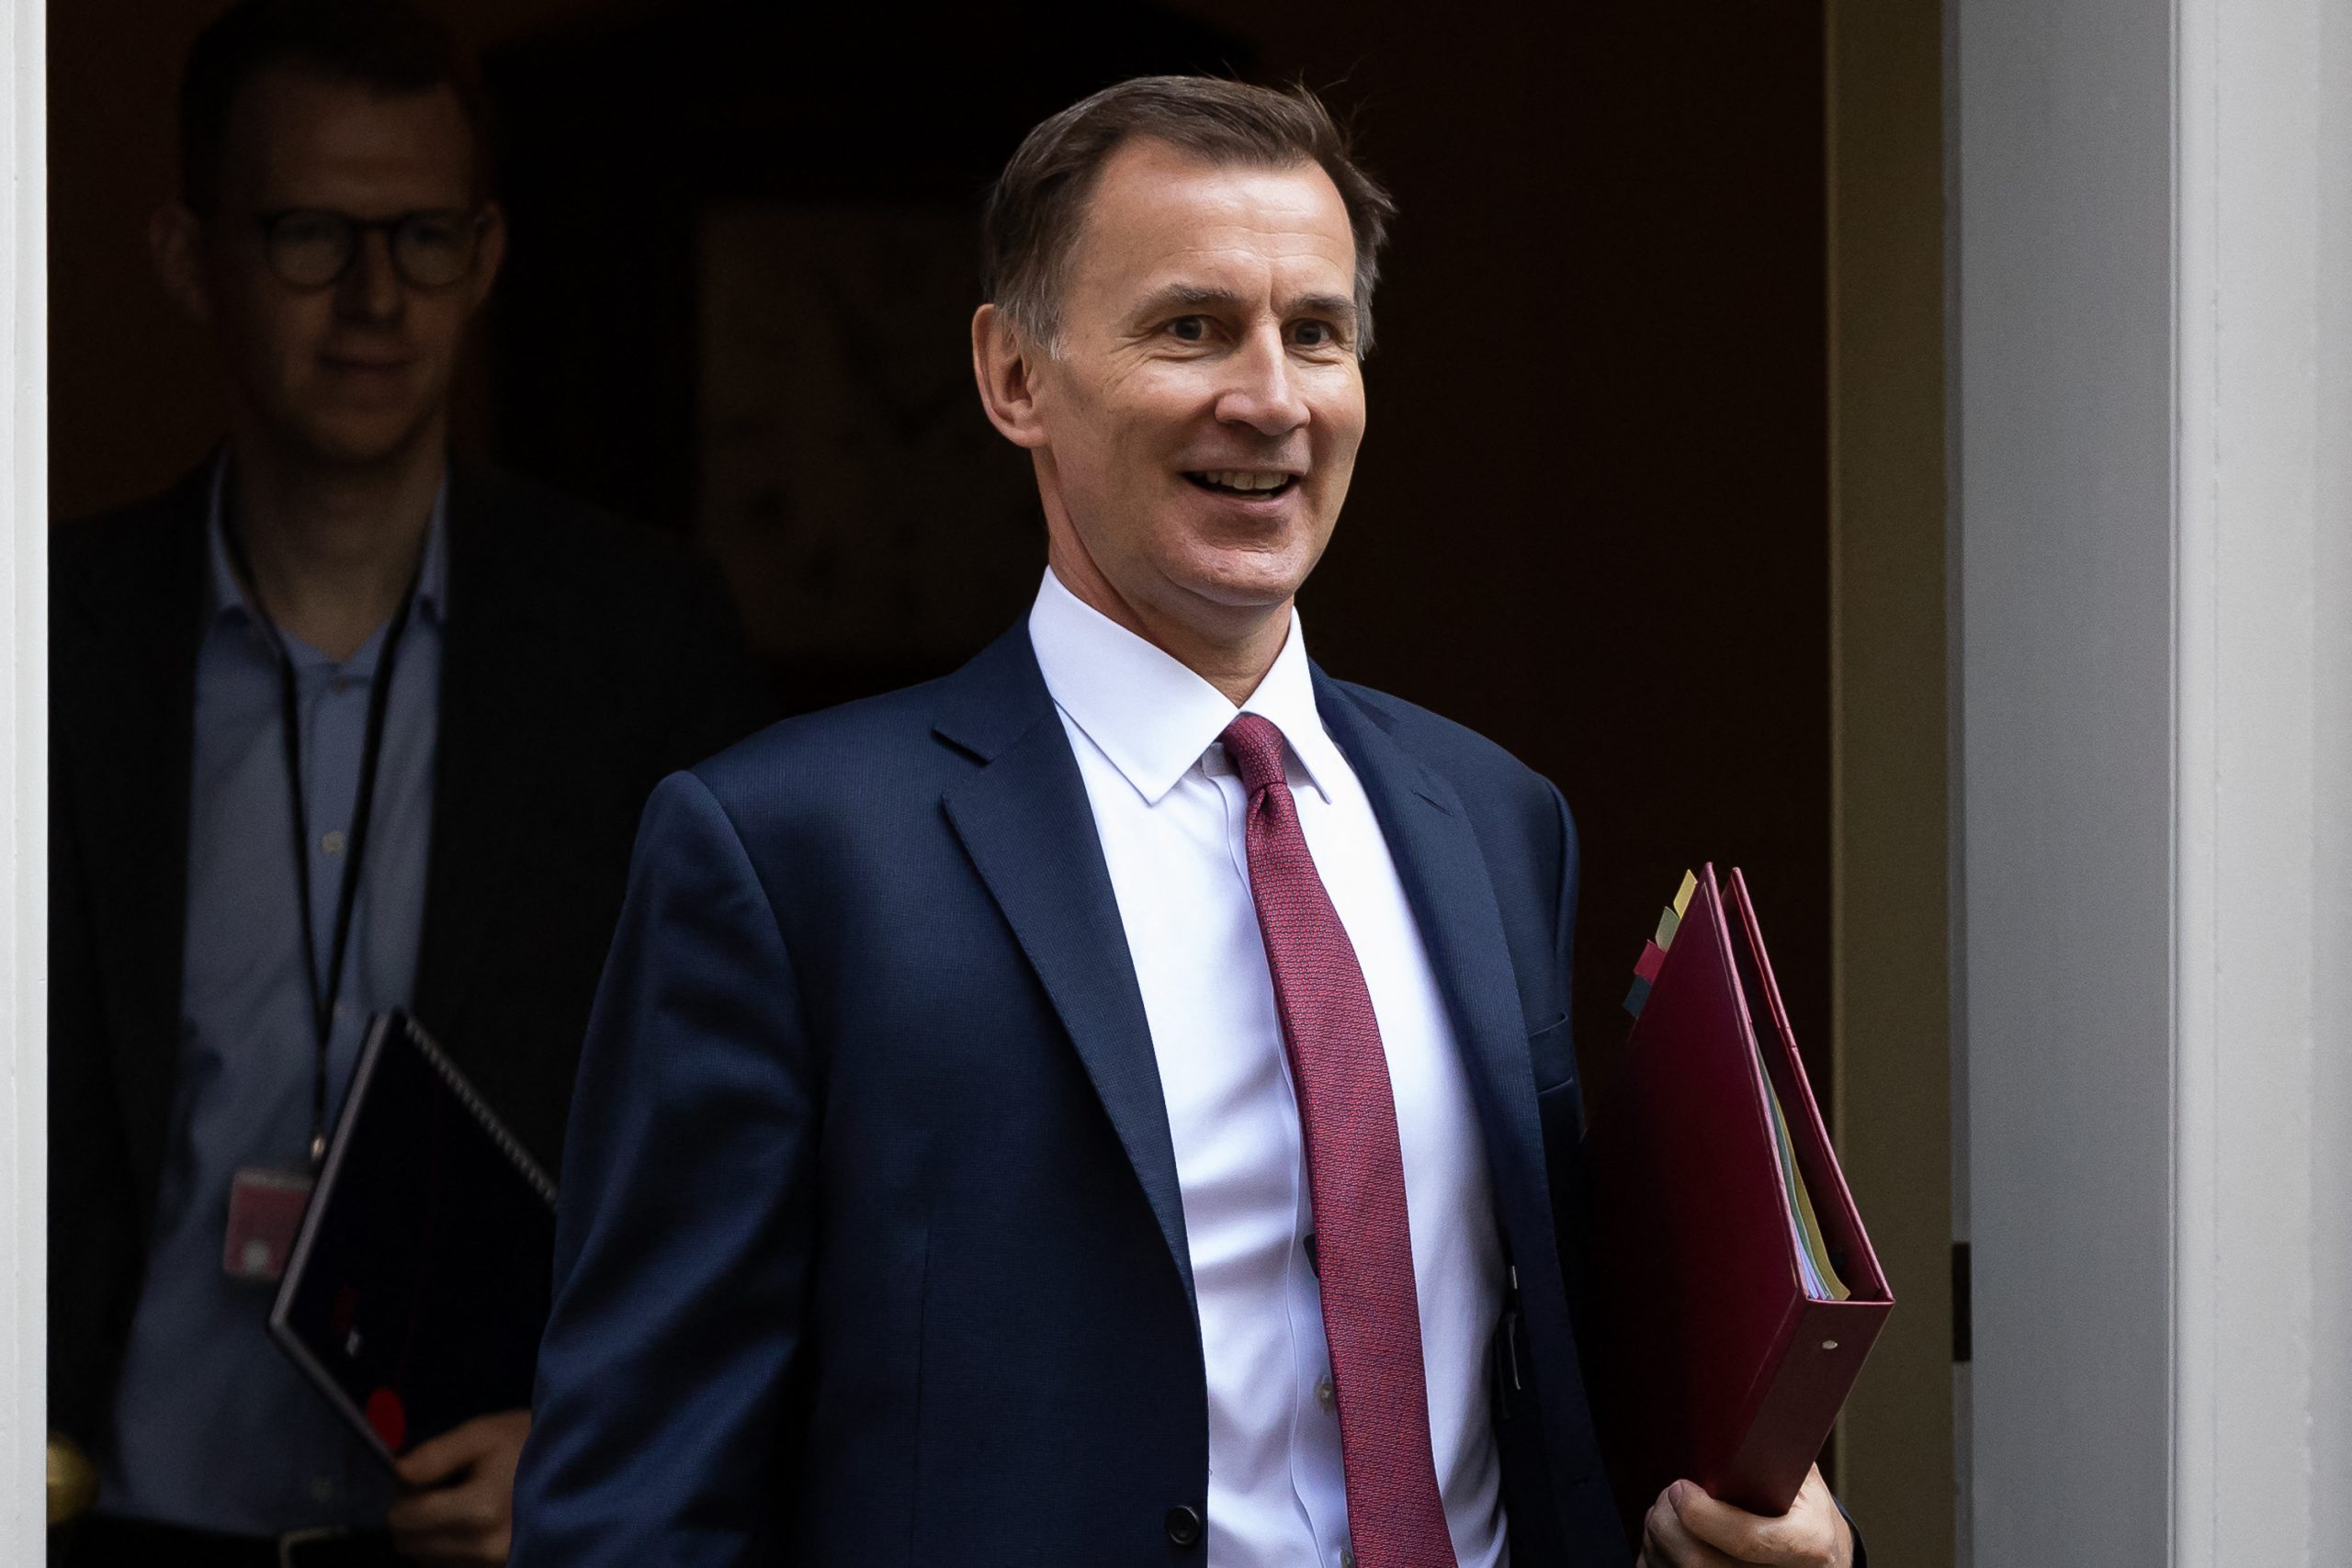 Hopes for Autumn Statement tax cuts dashed as Jeremy Hunt vows not to borrow more cash amid Britain’s soaring debts